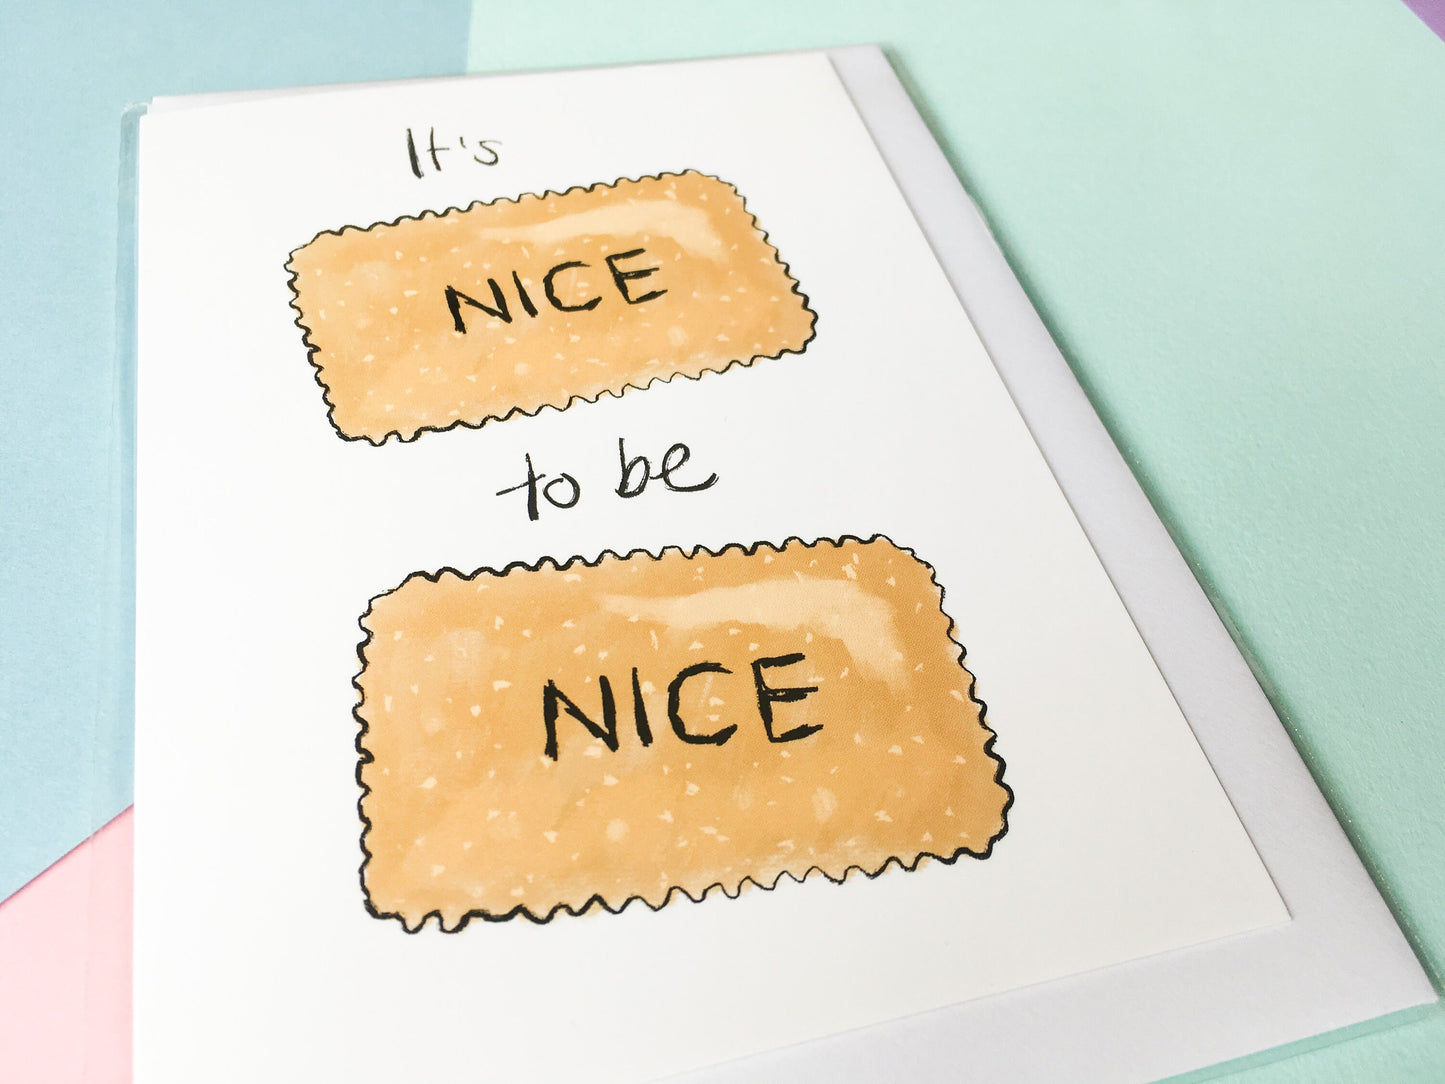 It's Nice to be Nice, Kindness Quote, Thank You Card